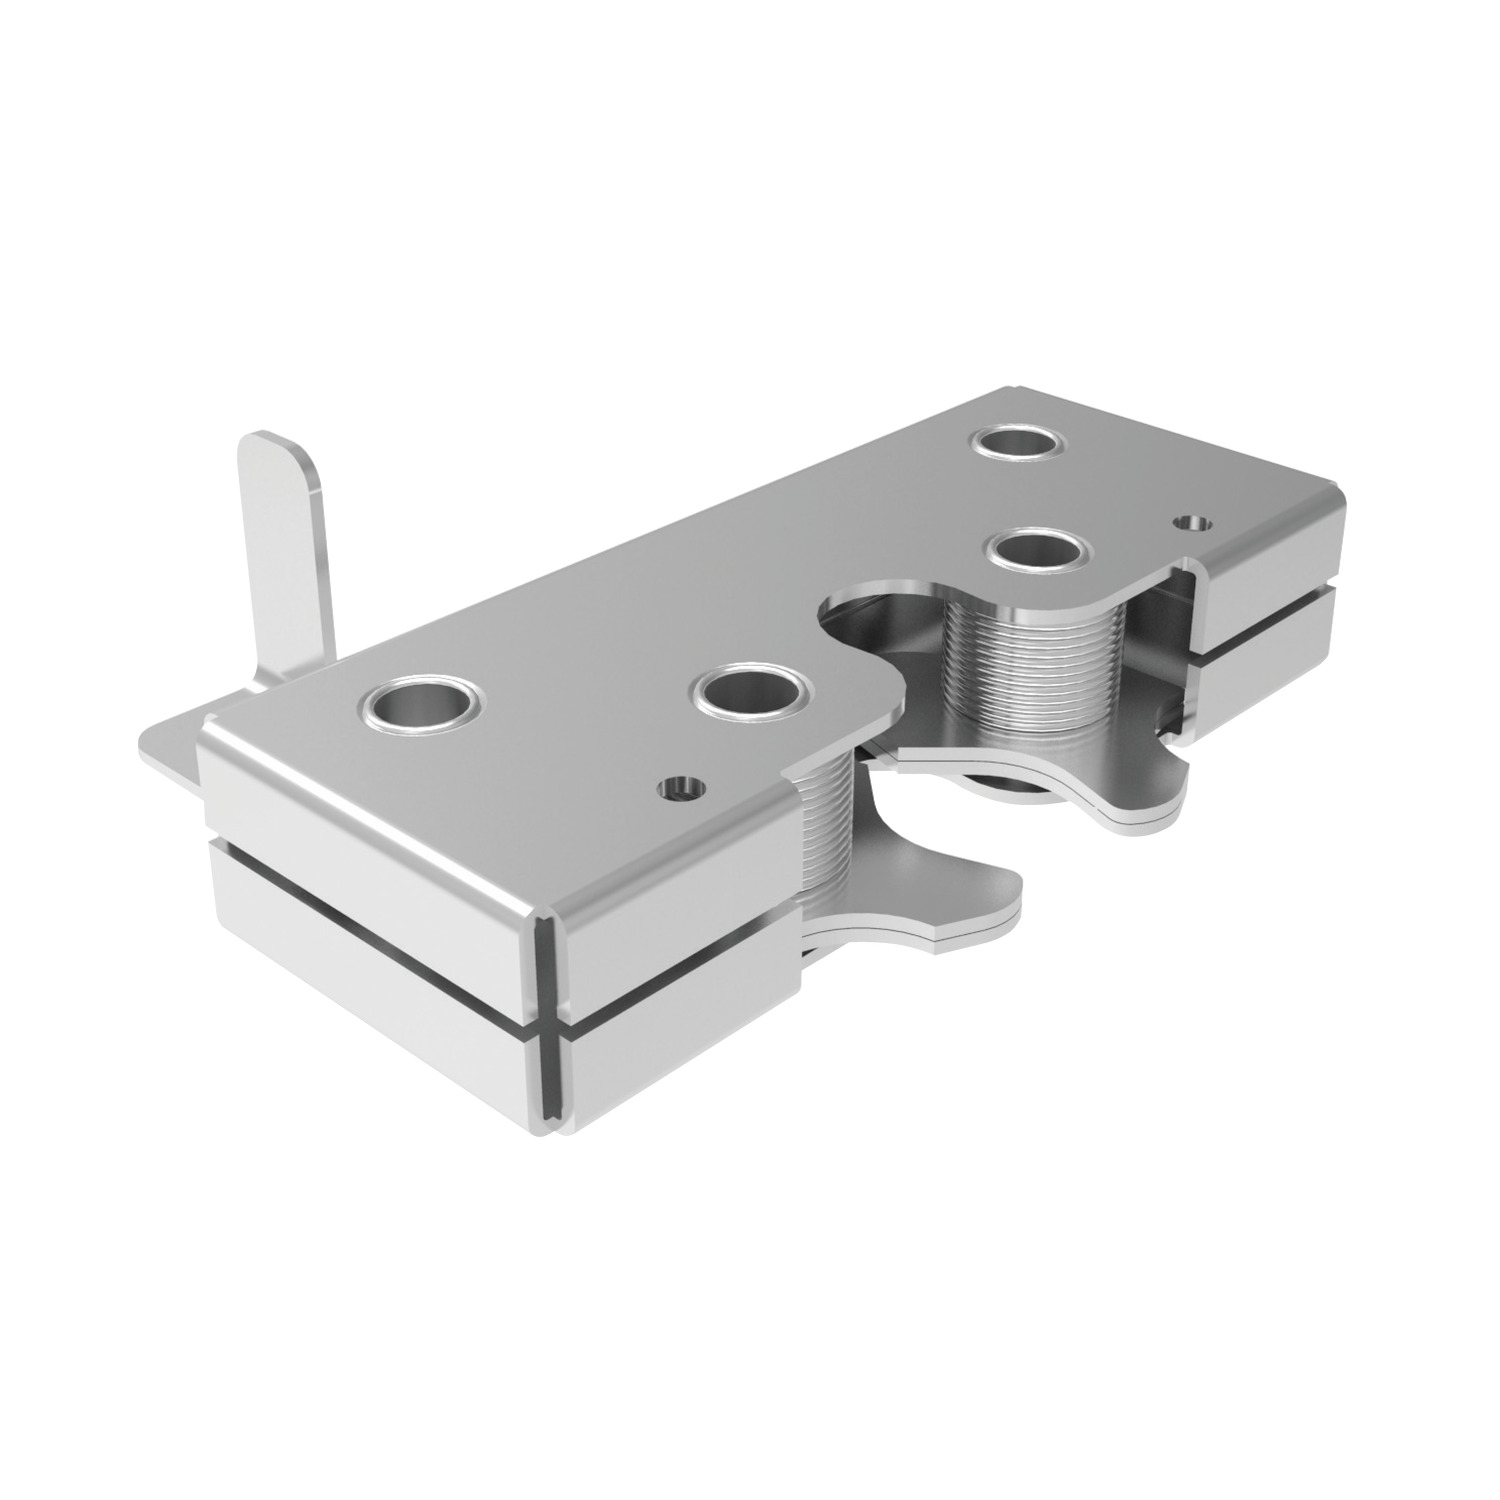 E4500.AW0010 Tension Catches rotary latch - steel